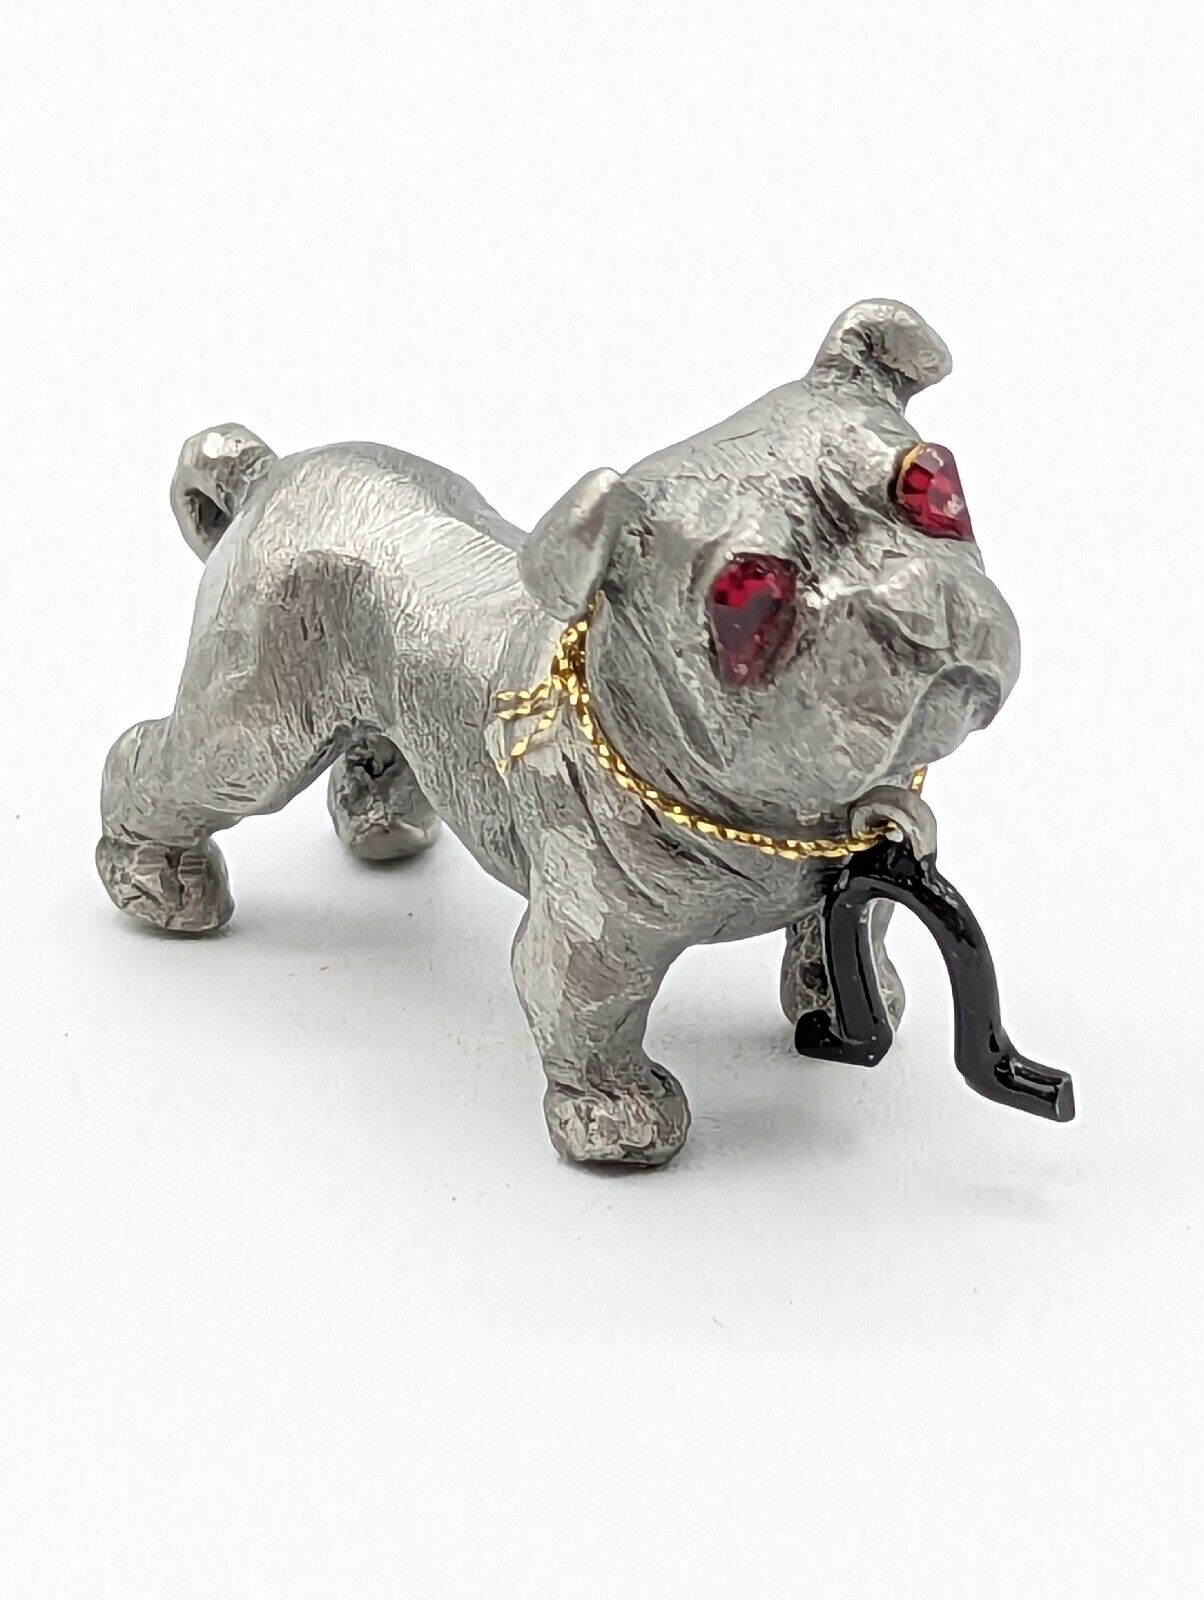 Vintage Cast Pewter Bulldog Figurine with Red Glass Eyes & Wishbone 1976 Signed